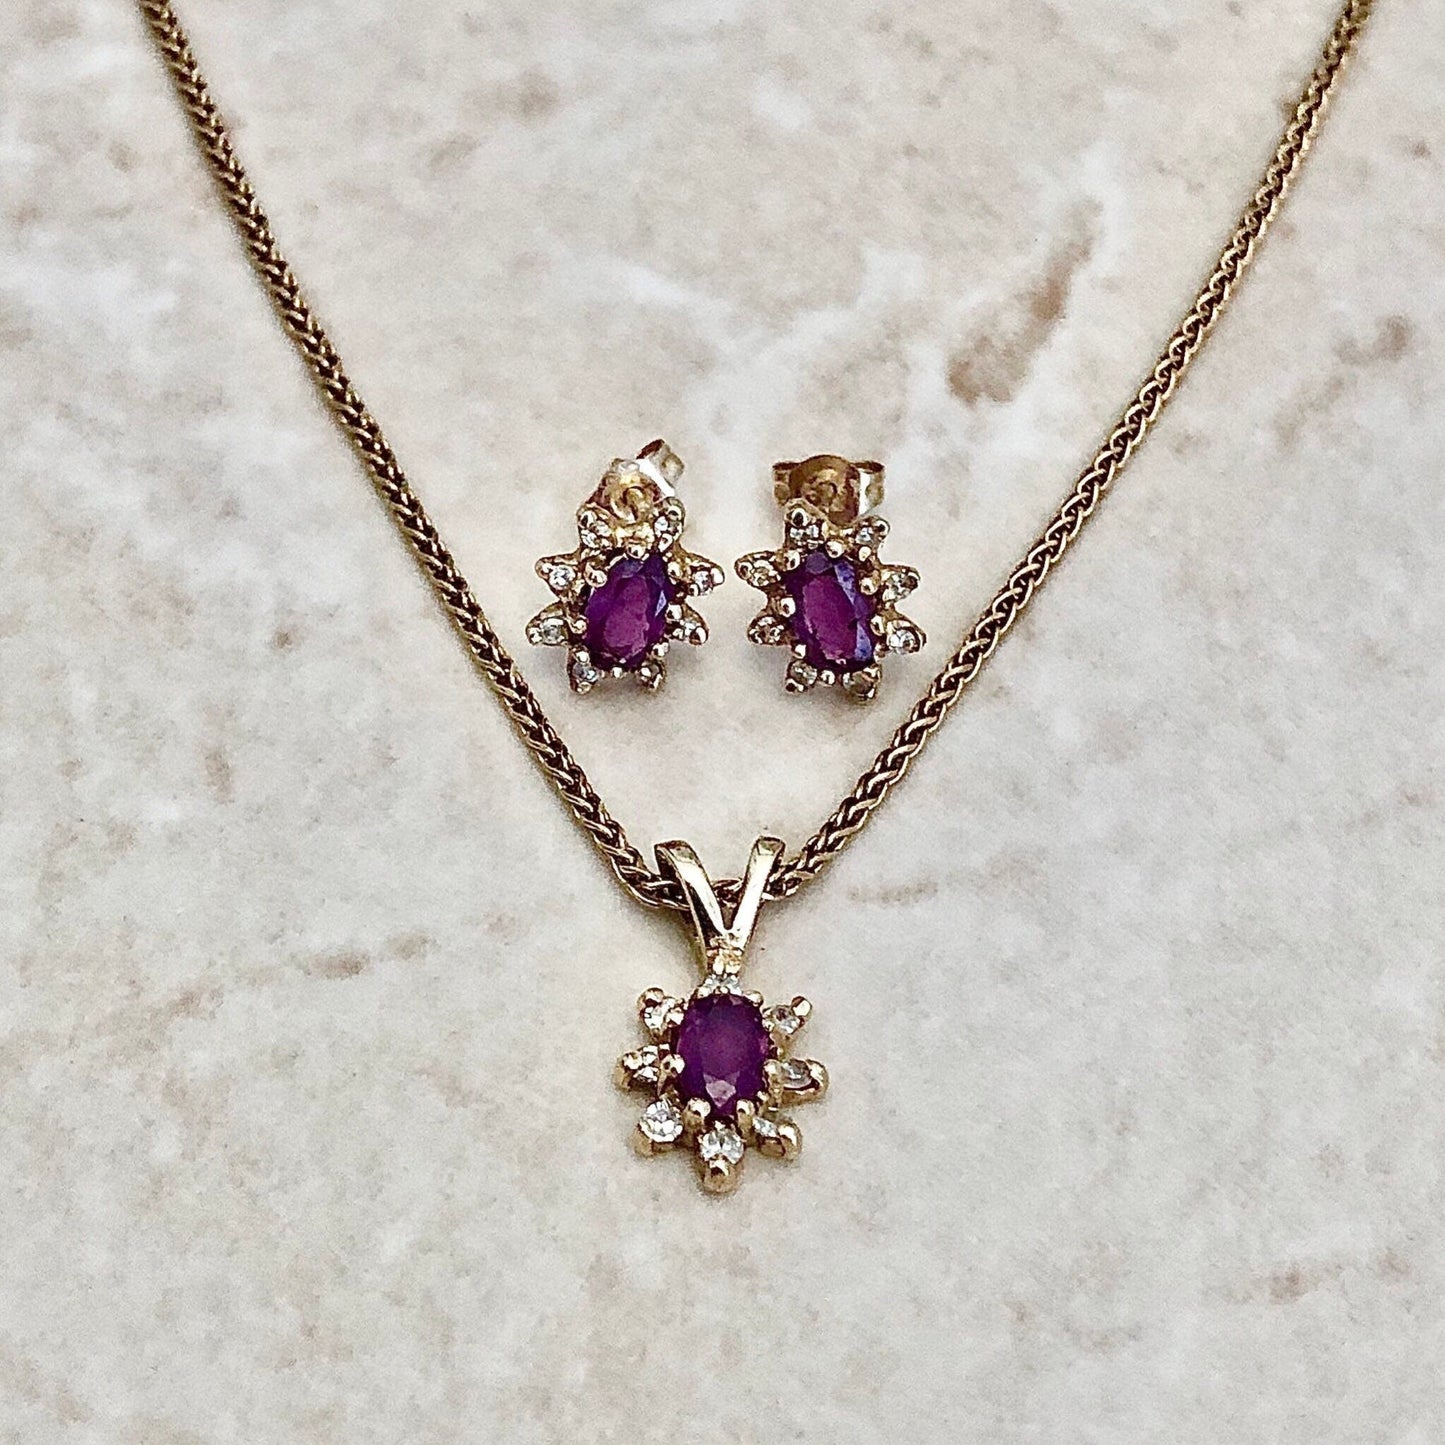 Vintage Natural Ruby & Diamond Halo Pendant And Earrings Set - 14 Karat Yellow Gold - July Birthstone - Birthday Gift - Necklace - Studs